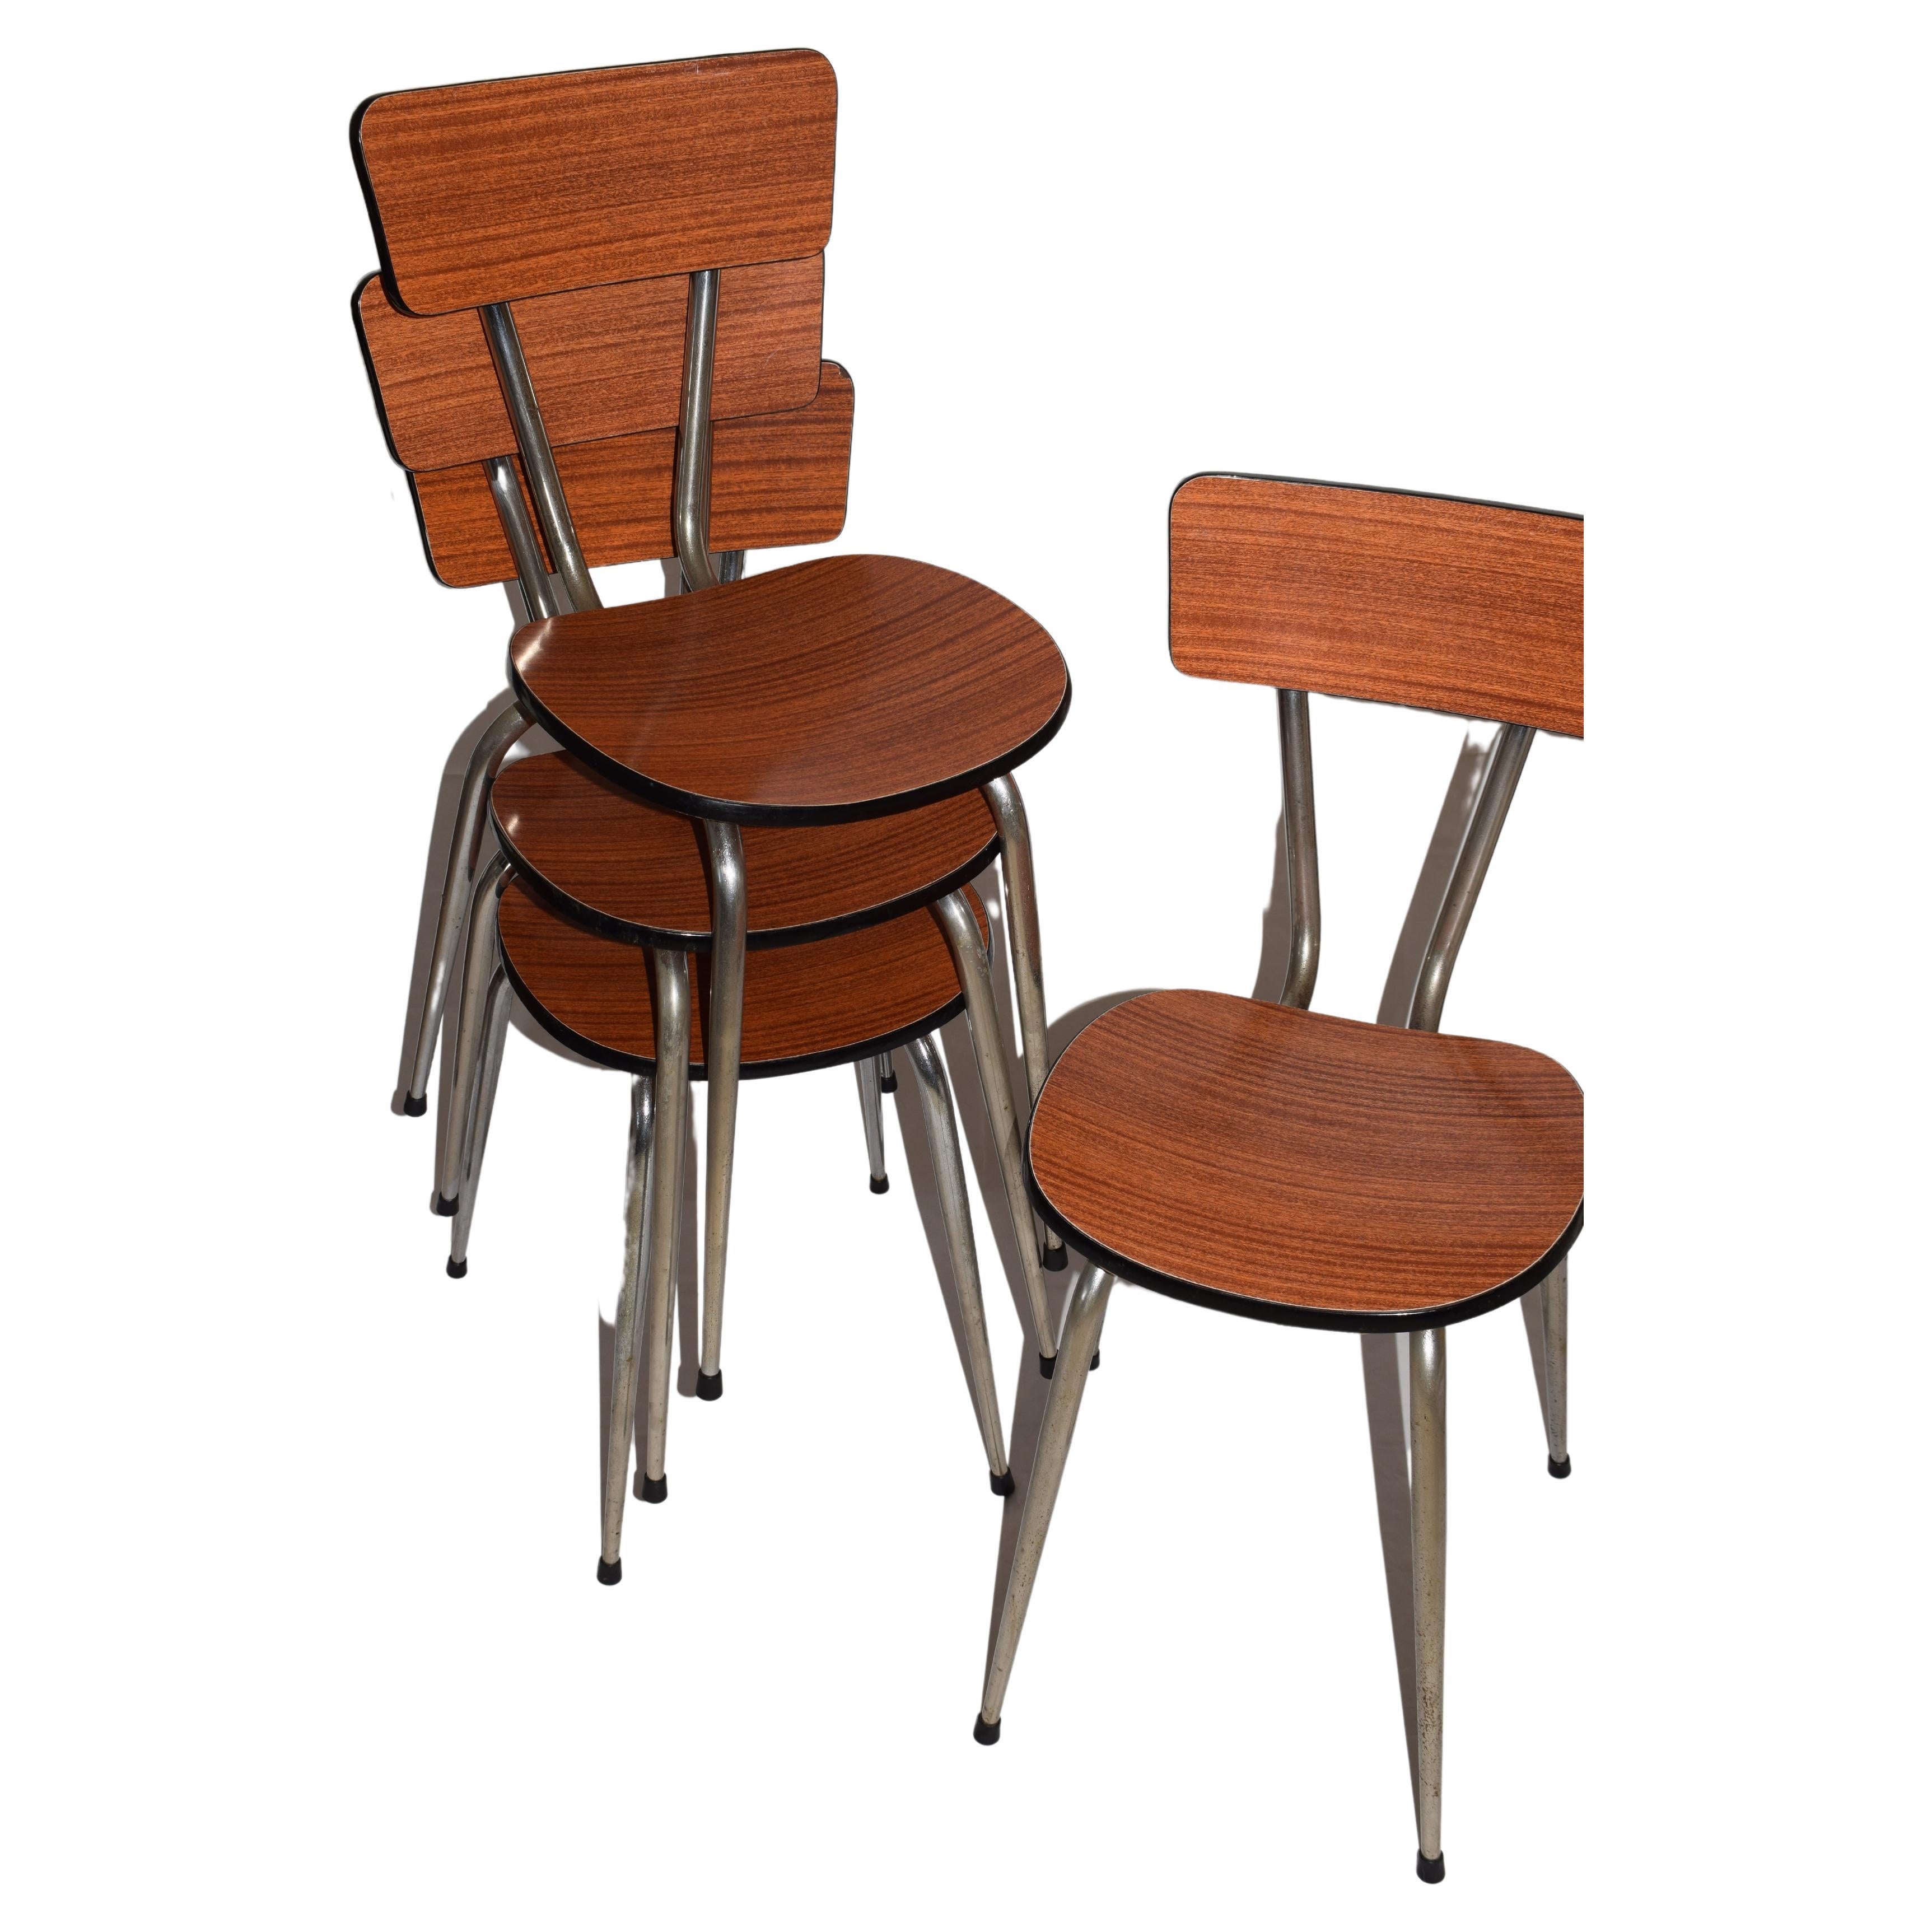 Set of 4 Brown 1950s-1960s Formica Dining Chairs